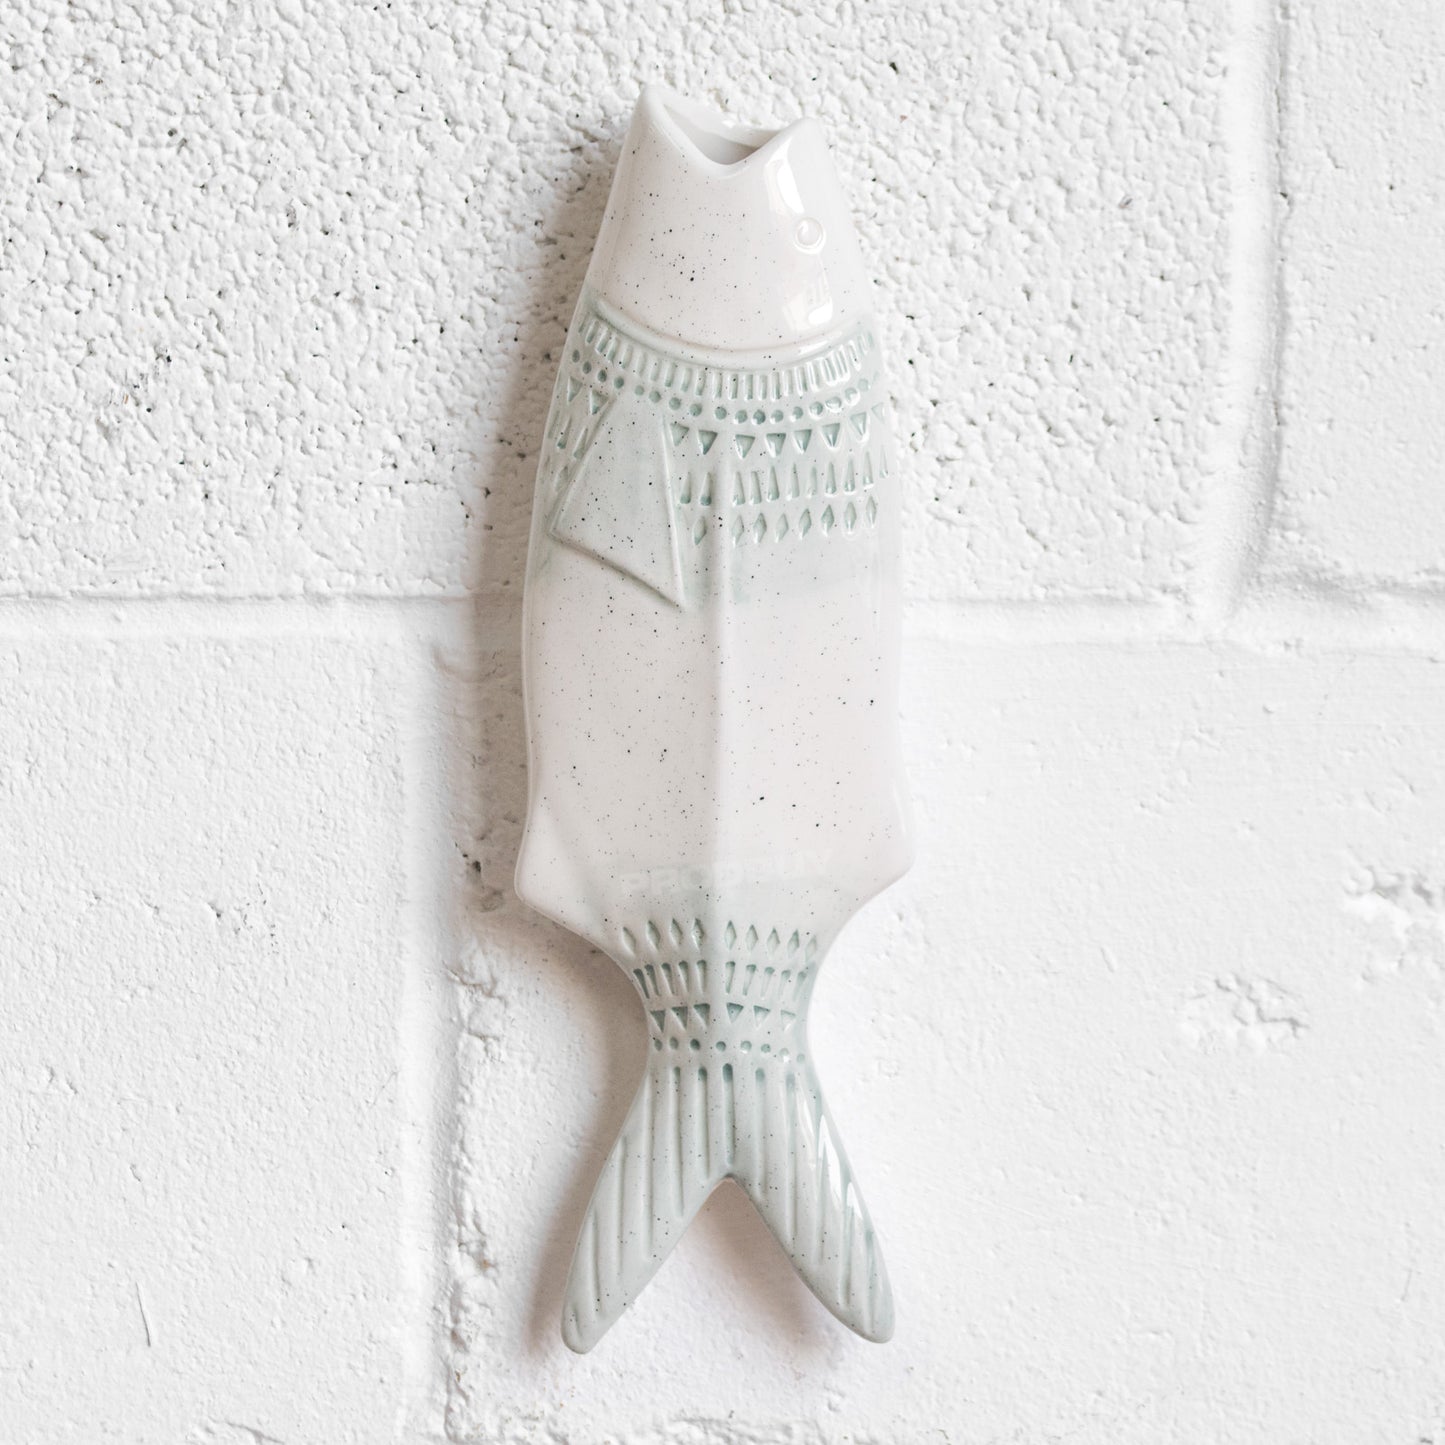 Ceramic Wall Mounted Speckled Fish Ornament